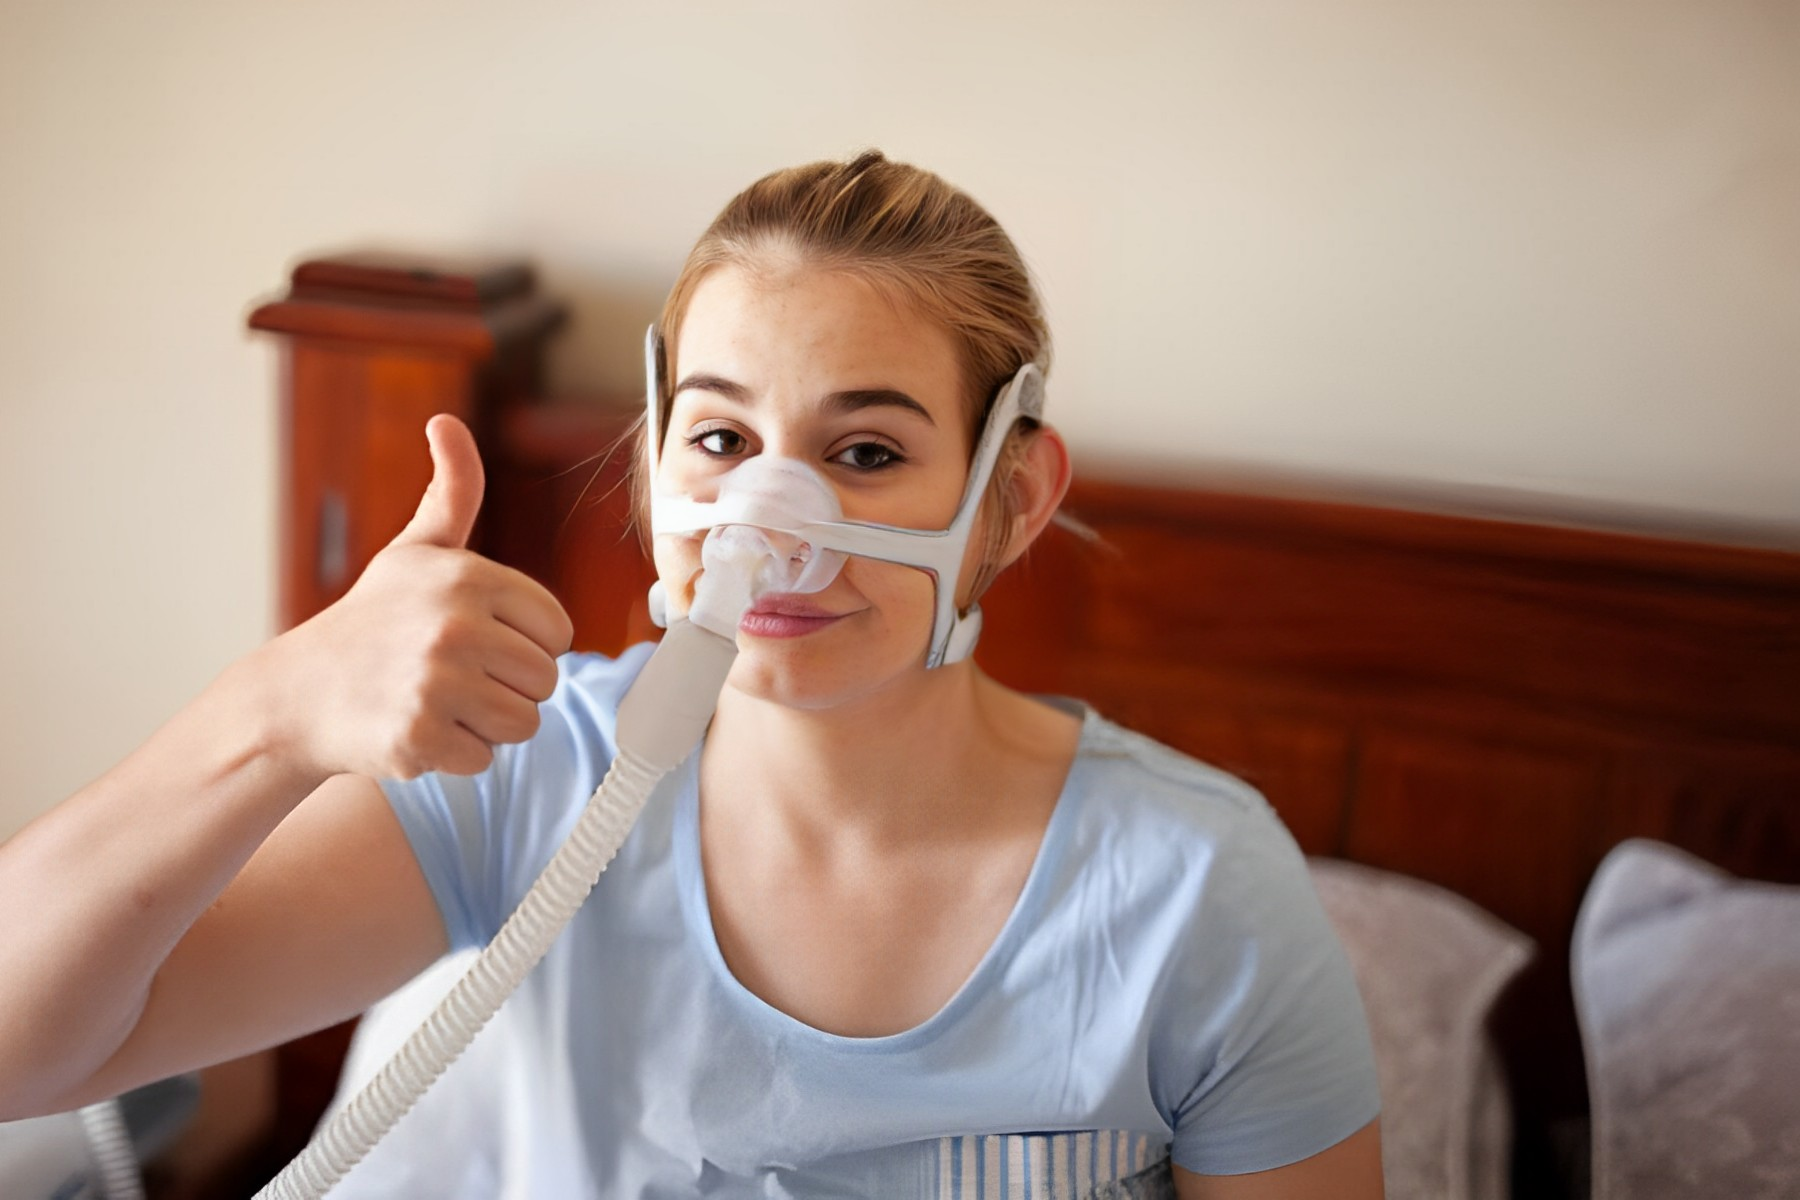 A photo of a teenage girl having a thumbs-up while using CPAP